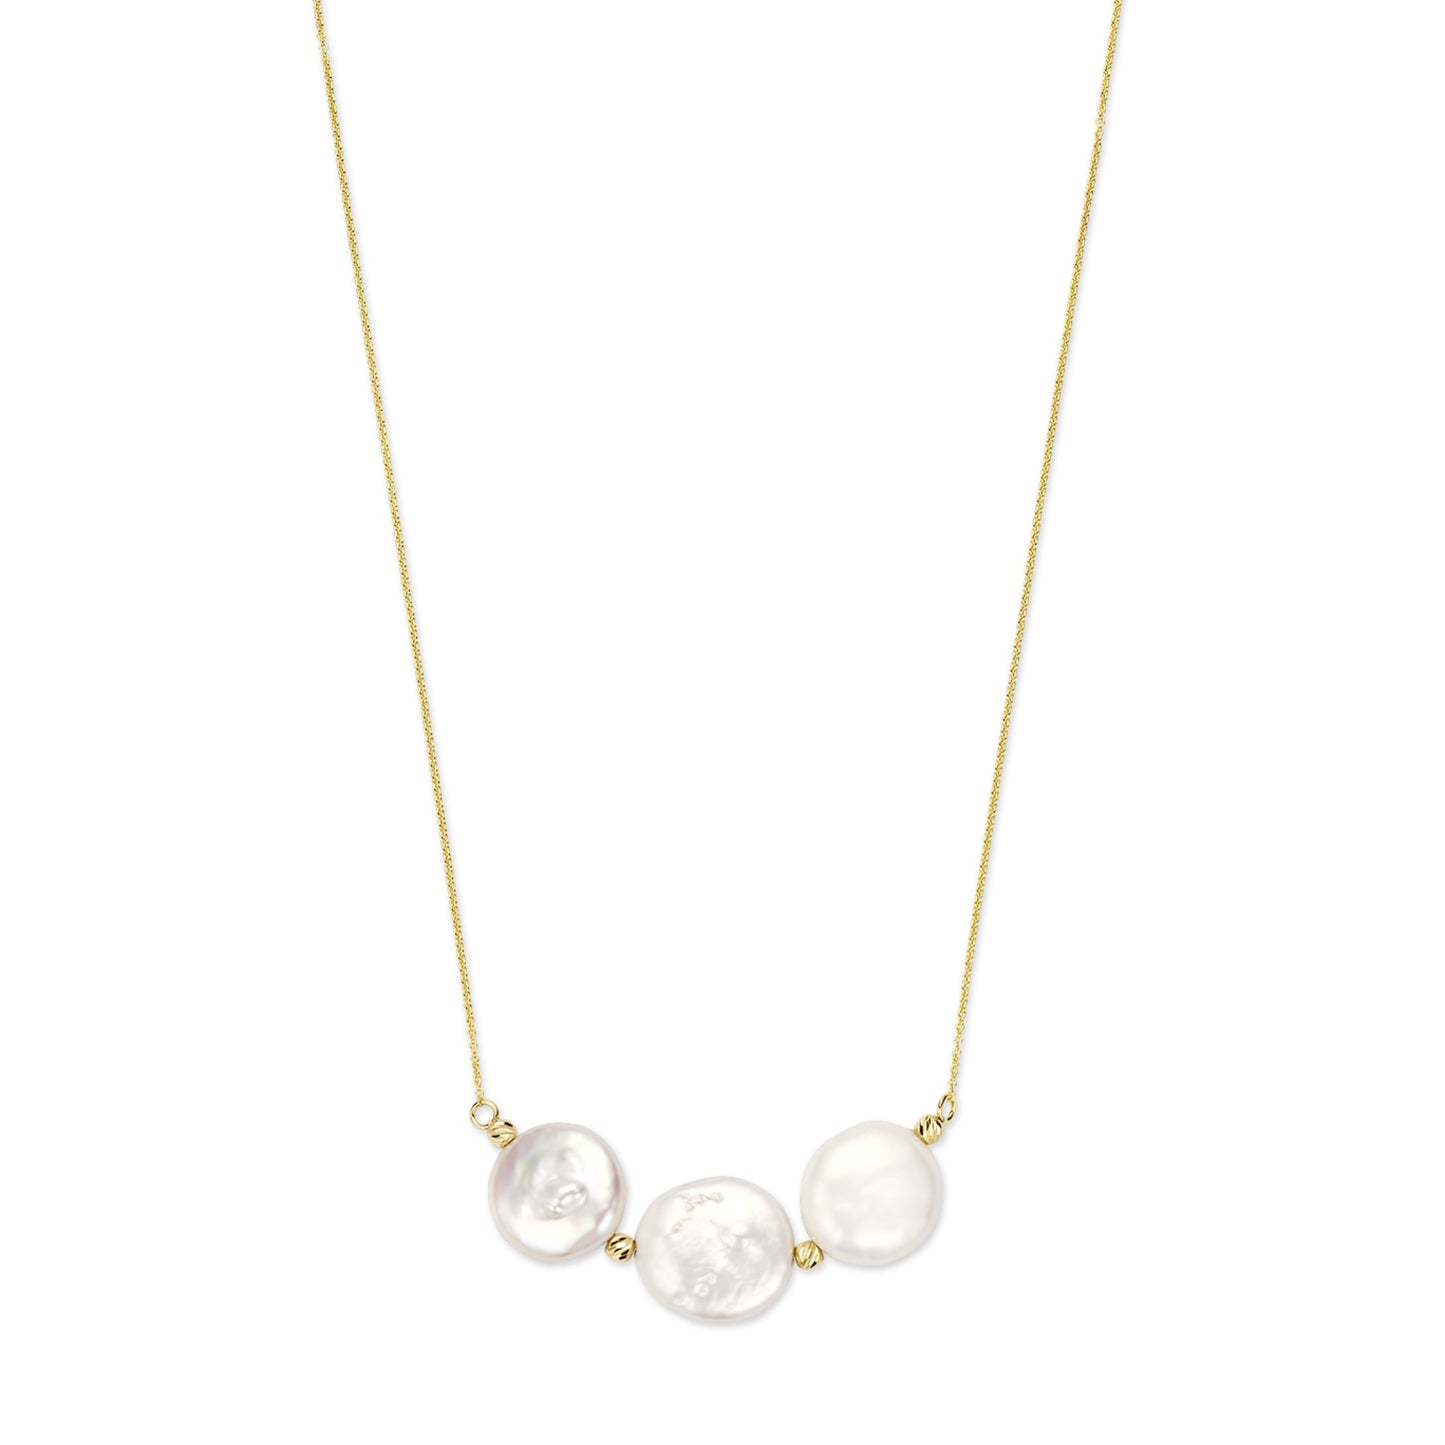 Monte Napoleone Alcinia 9 karat gold necklace with freshwater pearls